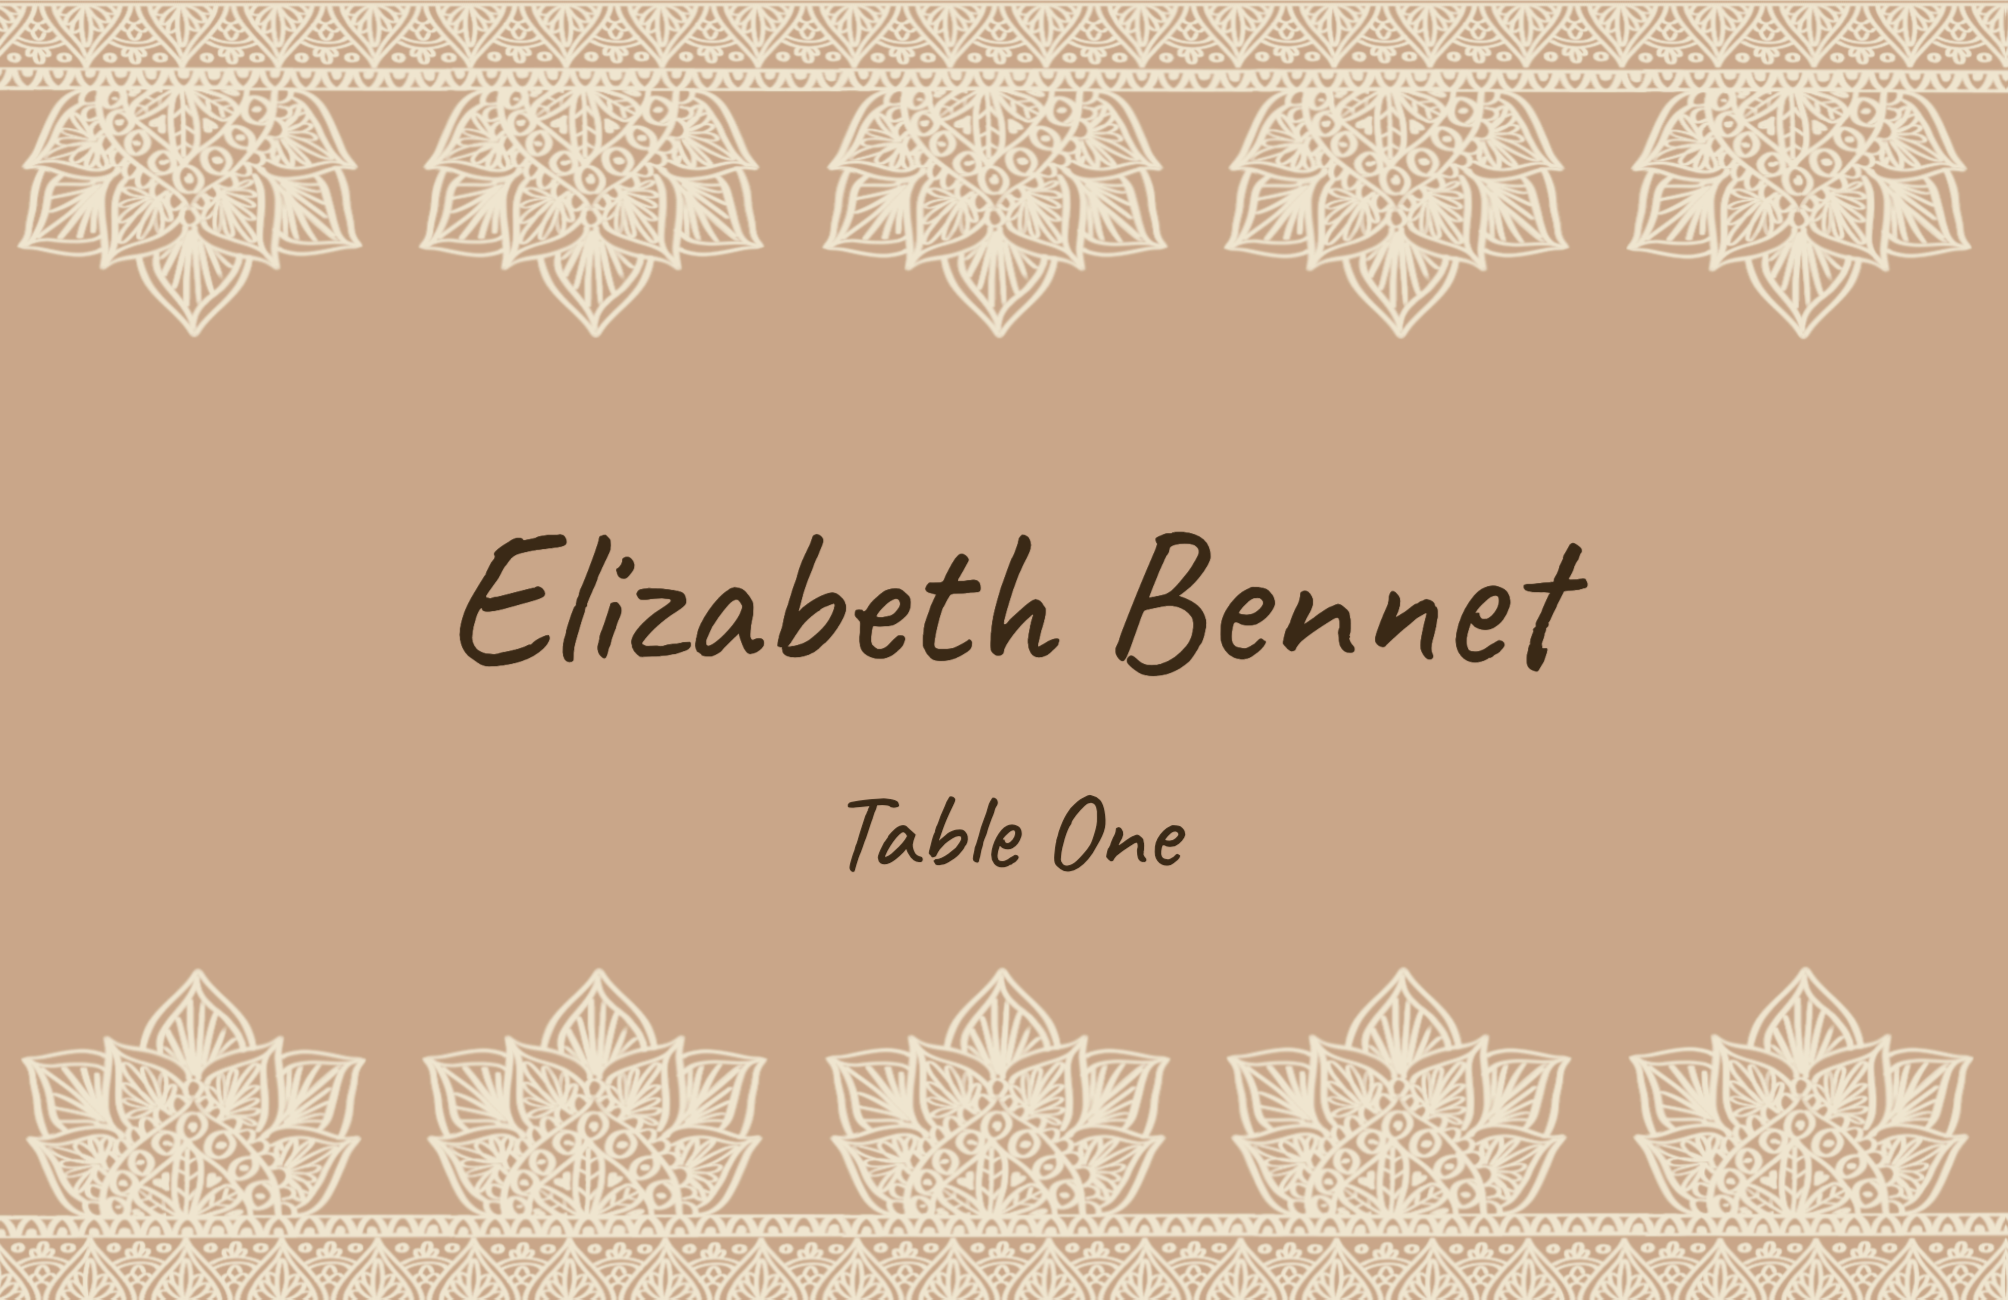 Lovely placecard for lovely guests